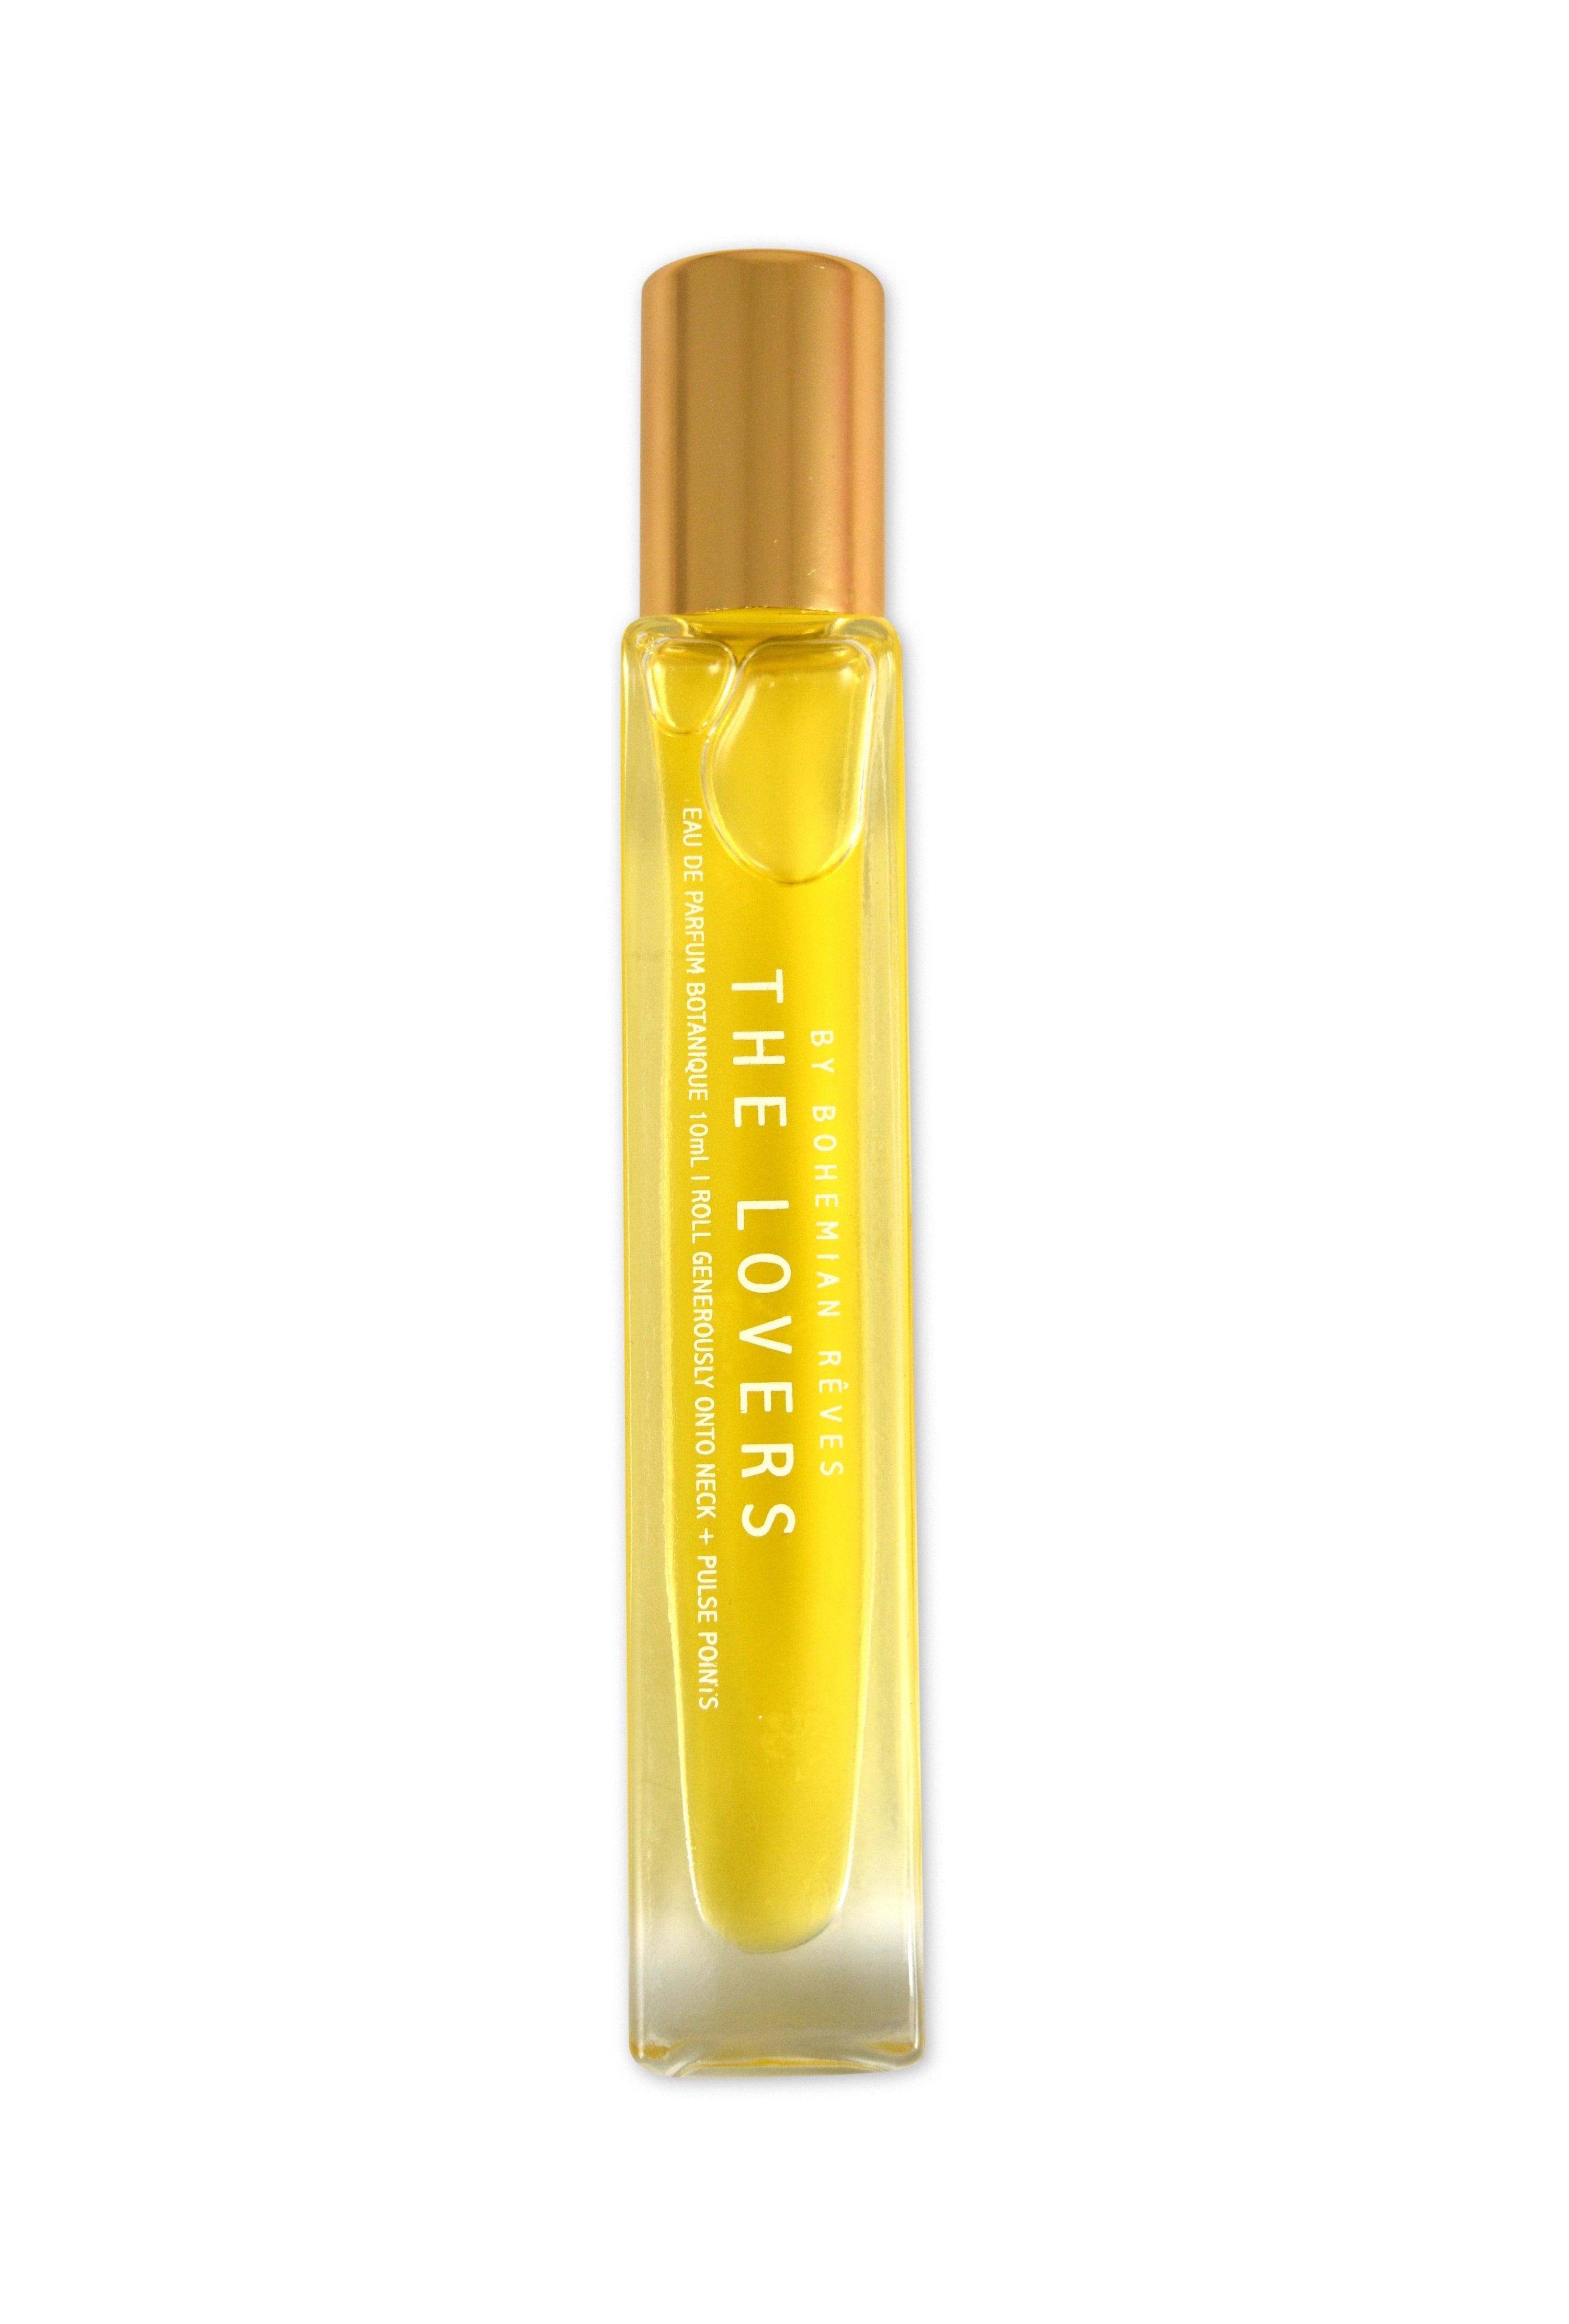 Perfume Roller in The Lovers